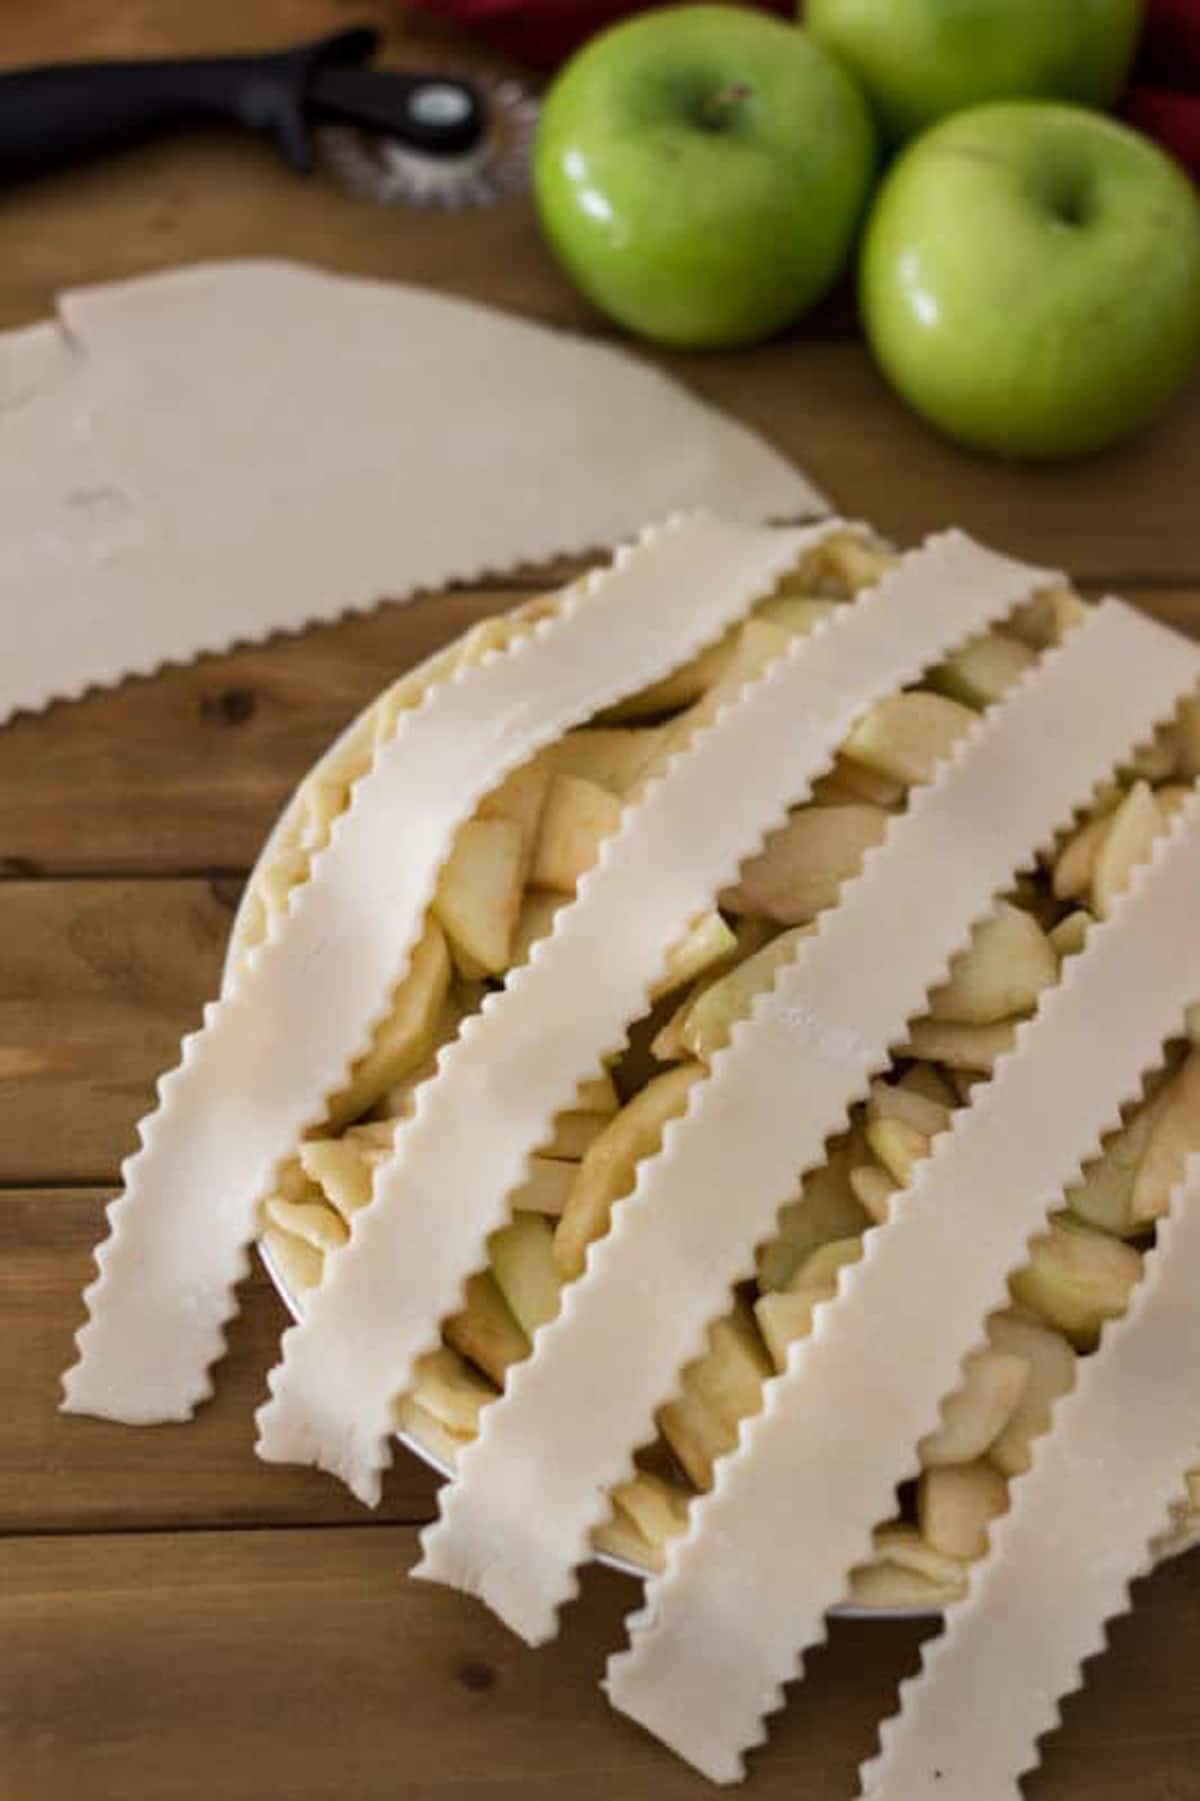 Pie covered with lattice pie crusts, granny smith apples on table.